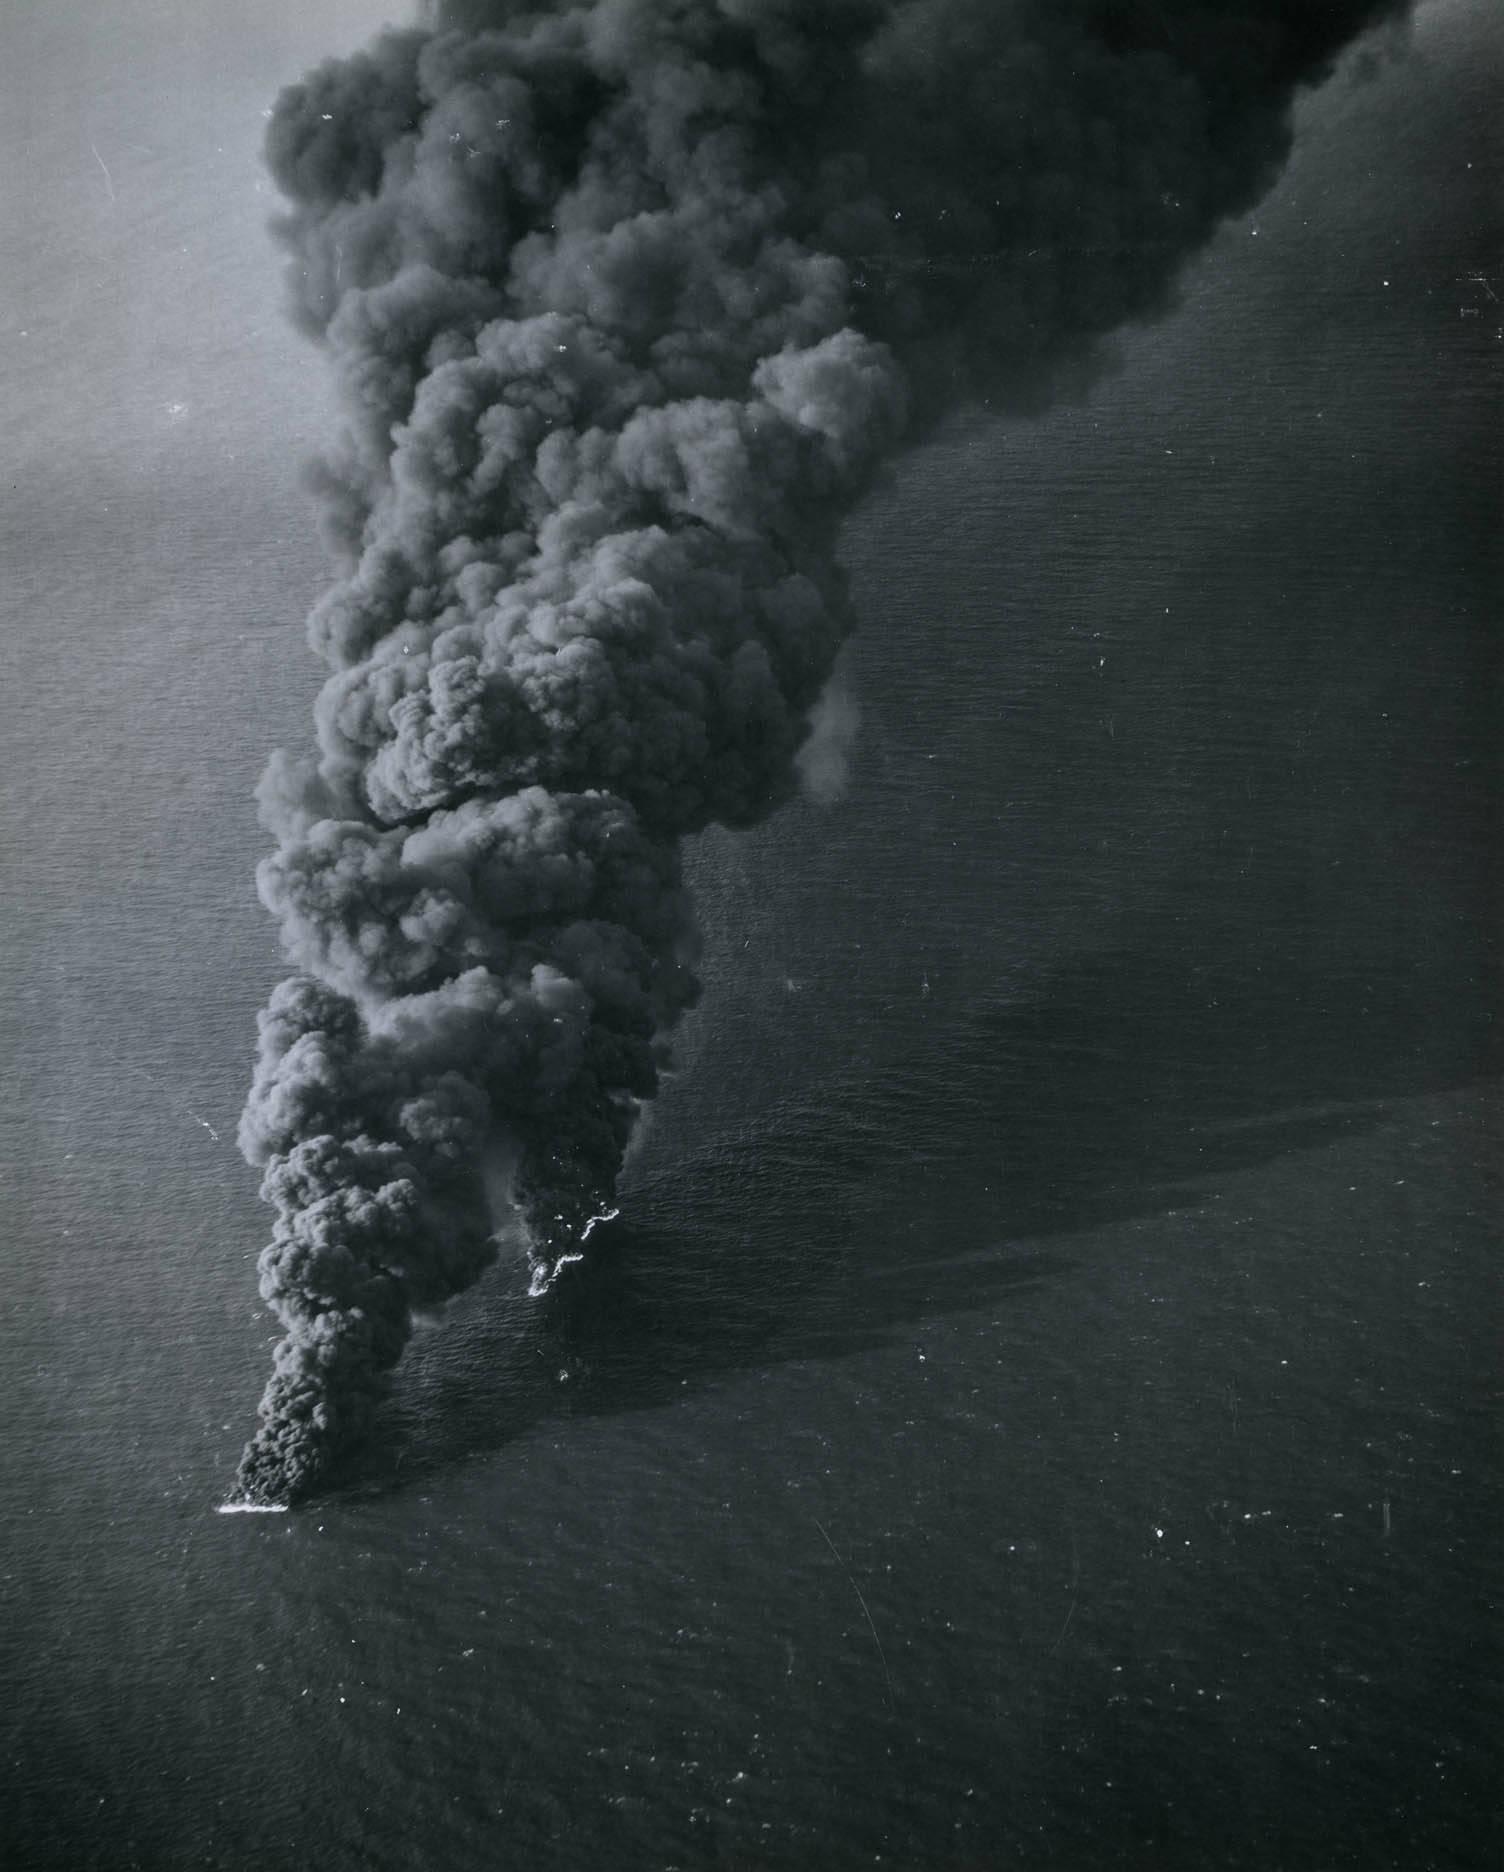 Japanese shipping burning furiously after attacks from US carrier aircraft off the coast of French Indochina (Vietnam), 12 Jan 1945.